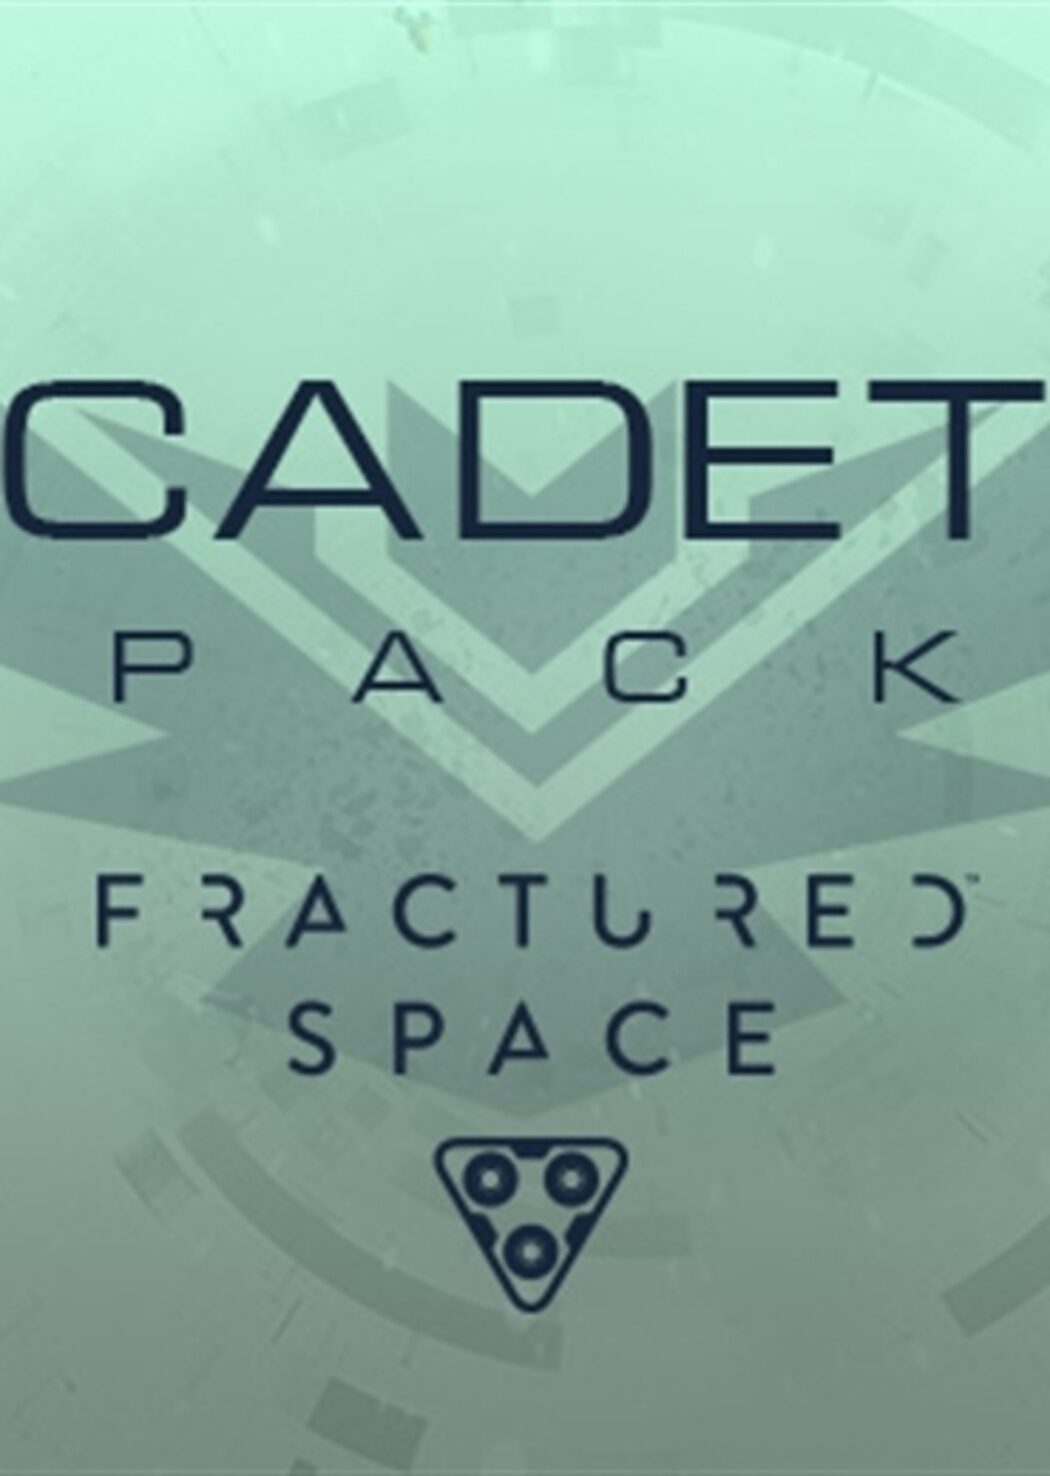 Fractured space steam фото 103